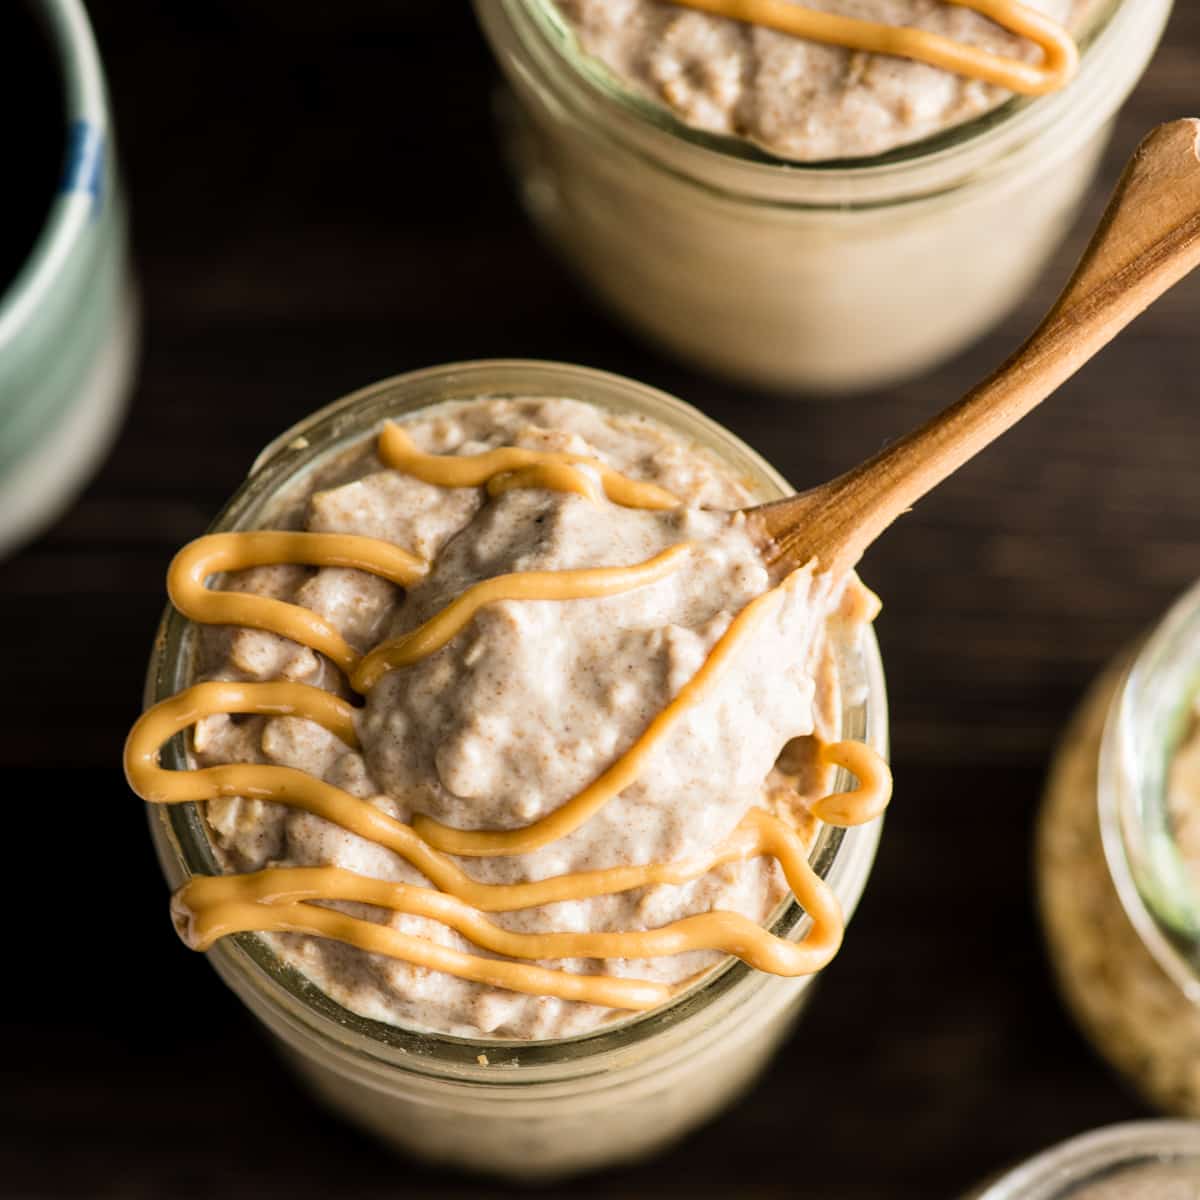 Overhead view of a spoon scooping some Peanut Butter Chia Overnight Oats out of a glass jar 